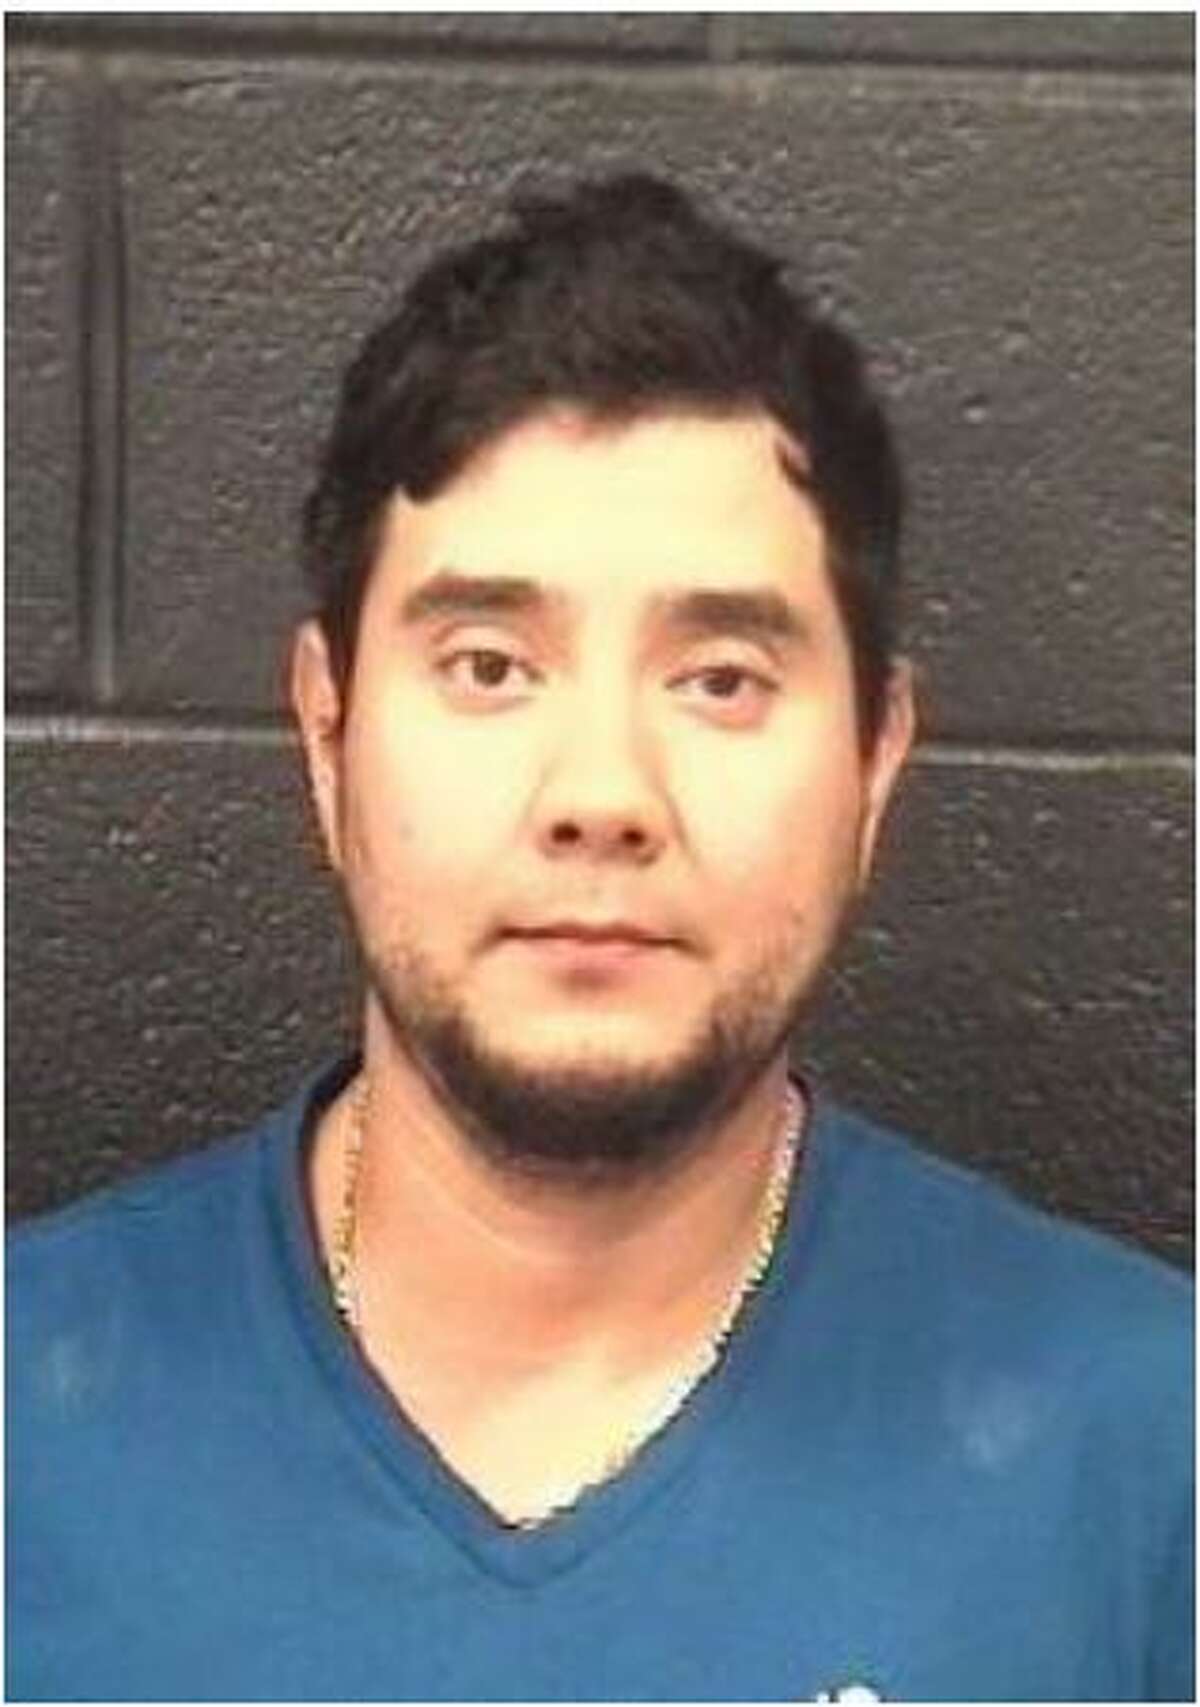 Jonathan Segovia was charged with driving while intoxicated.